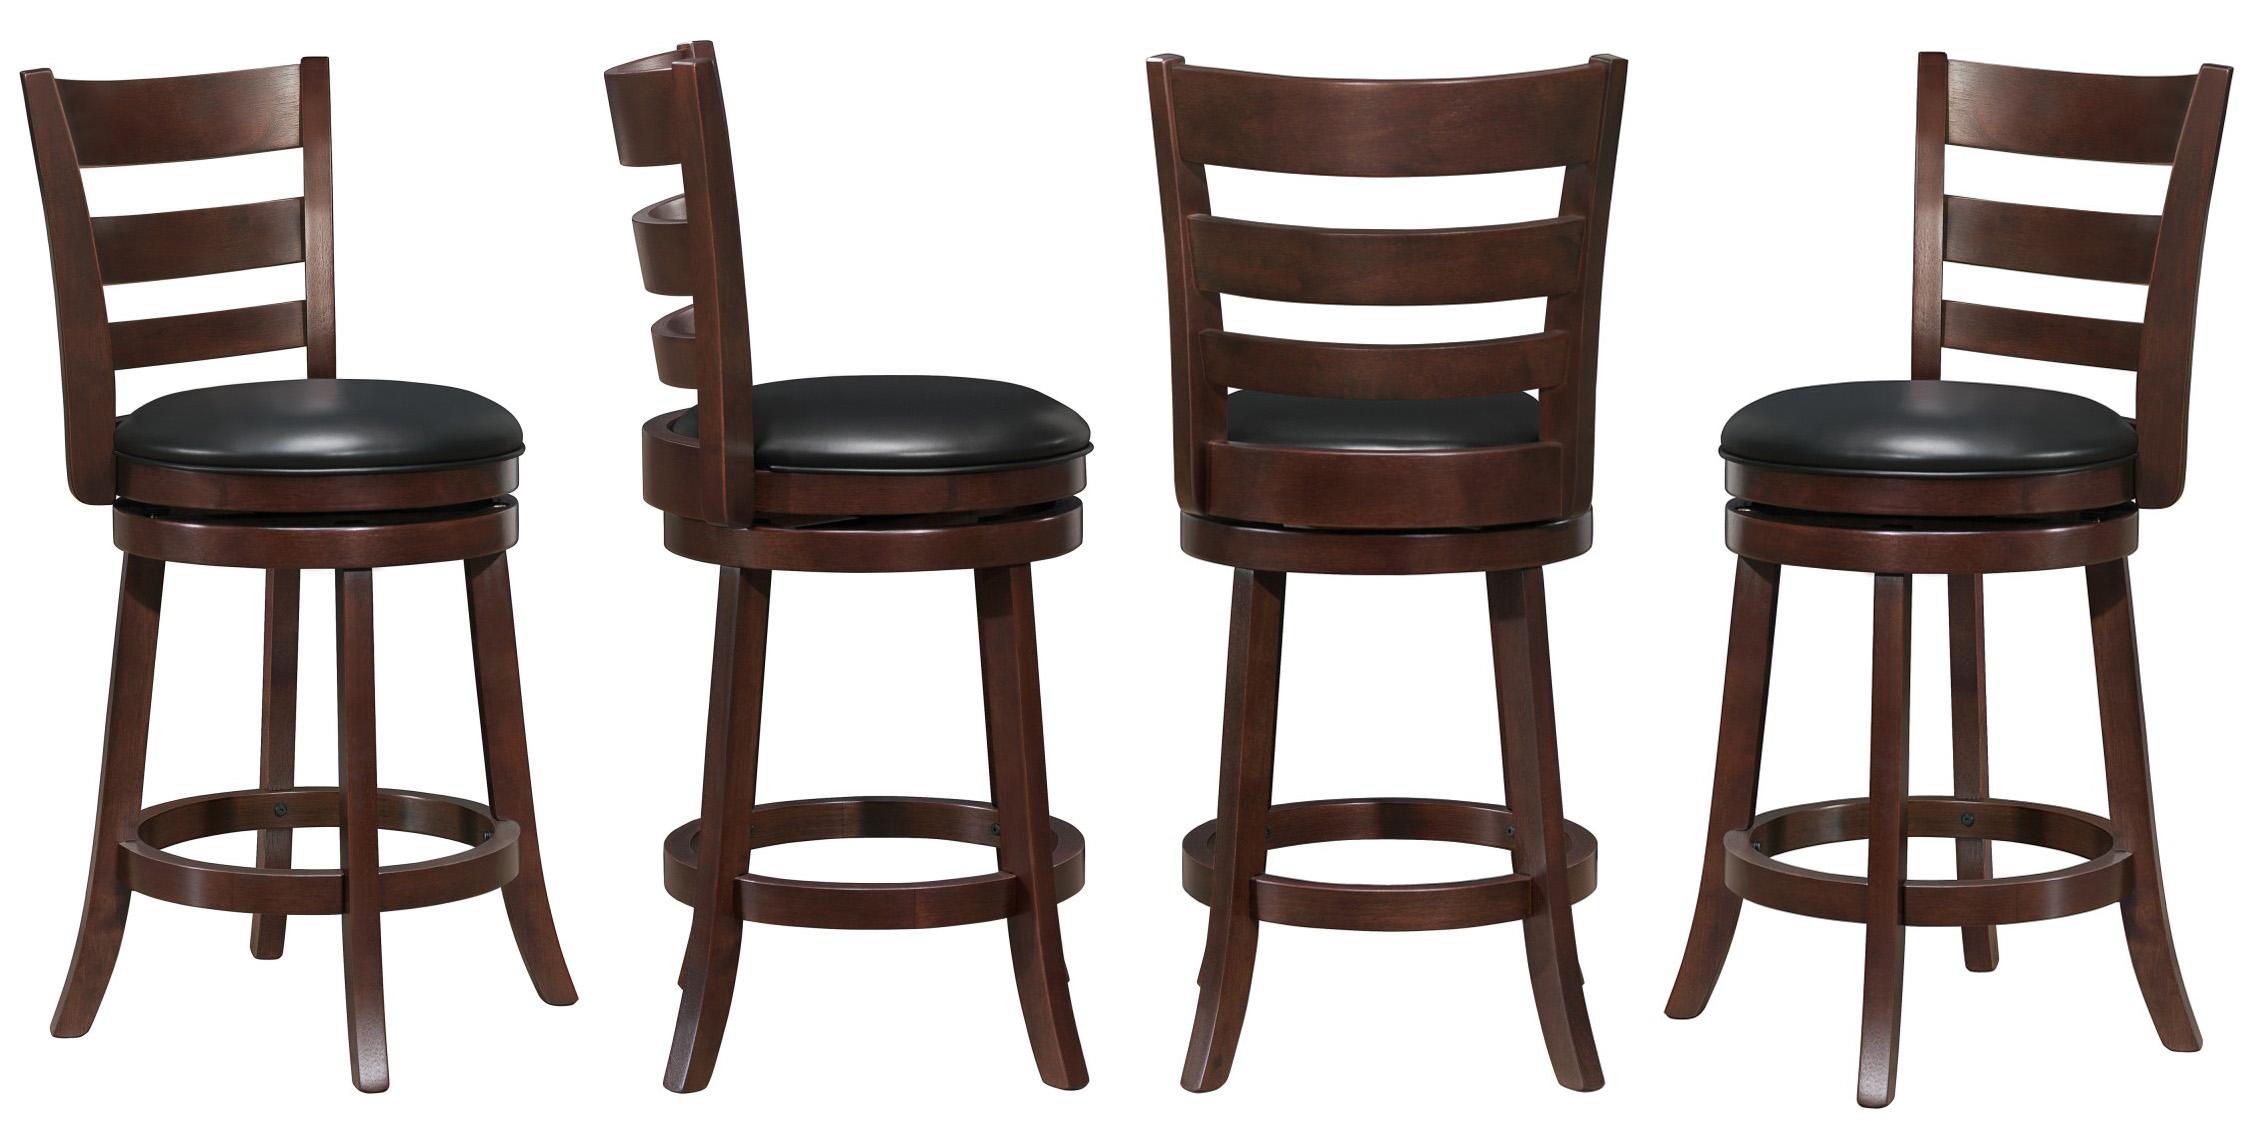 Traditional, Casual Dining Chair Set EDMOND 1144E-24S-Set-4 in Dark Cherry Faux Leather